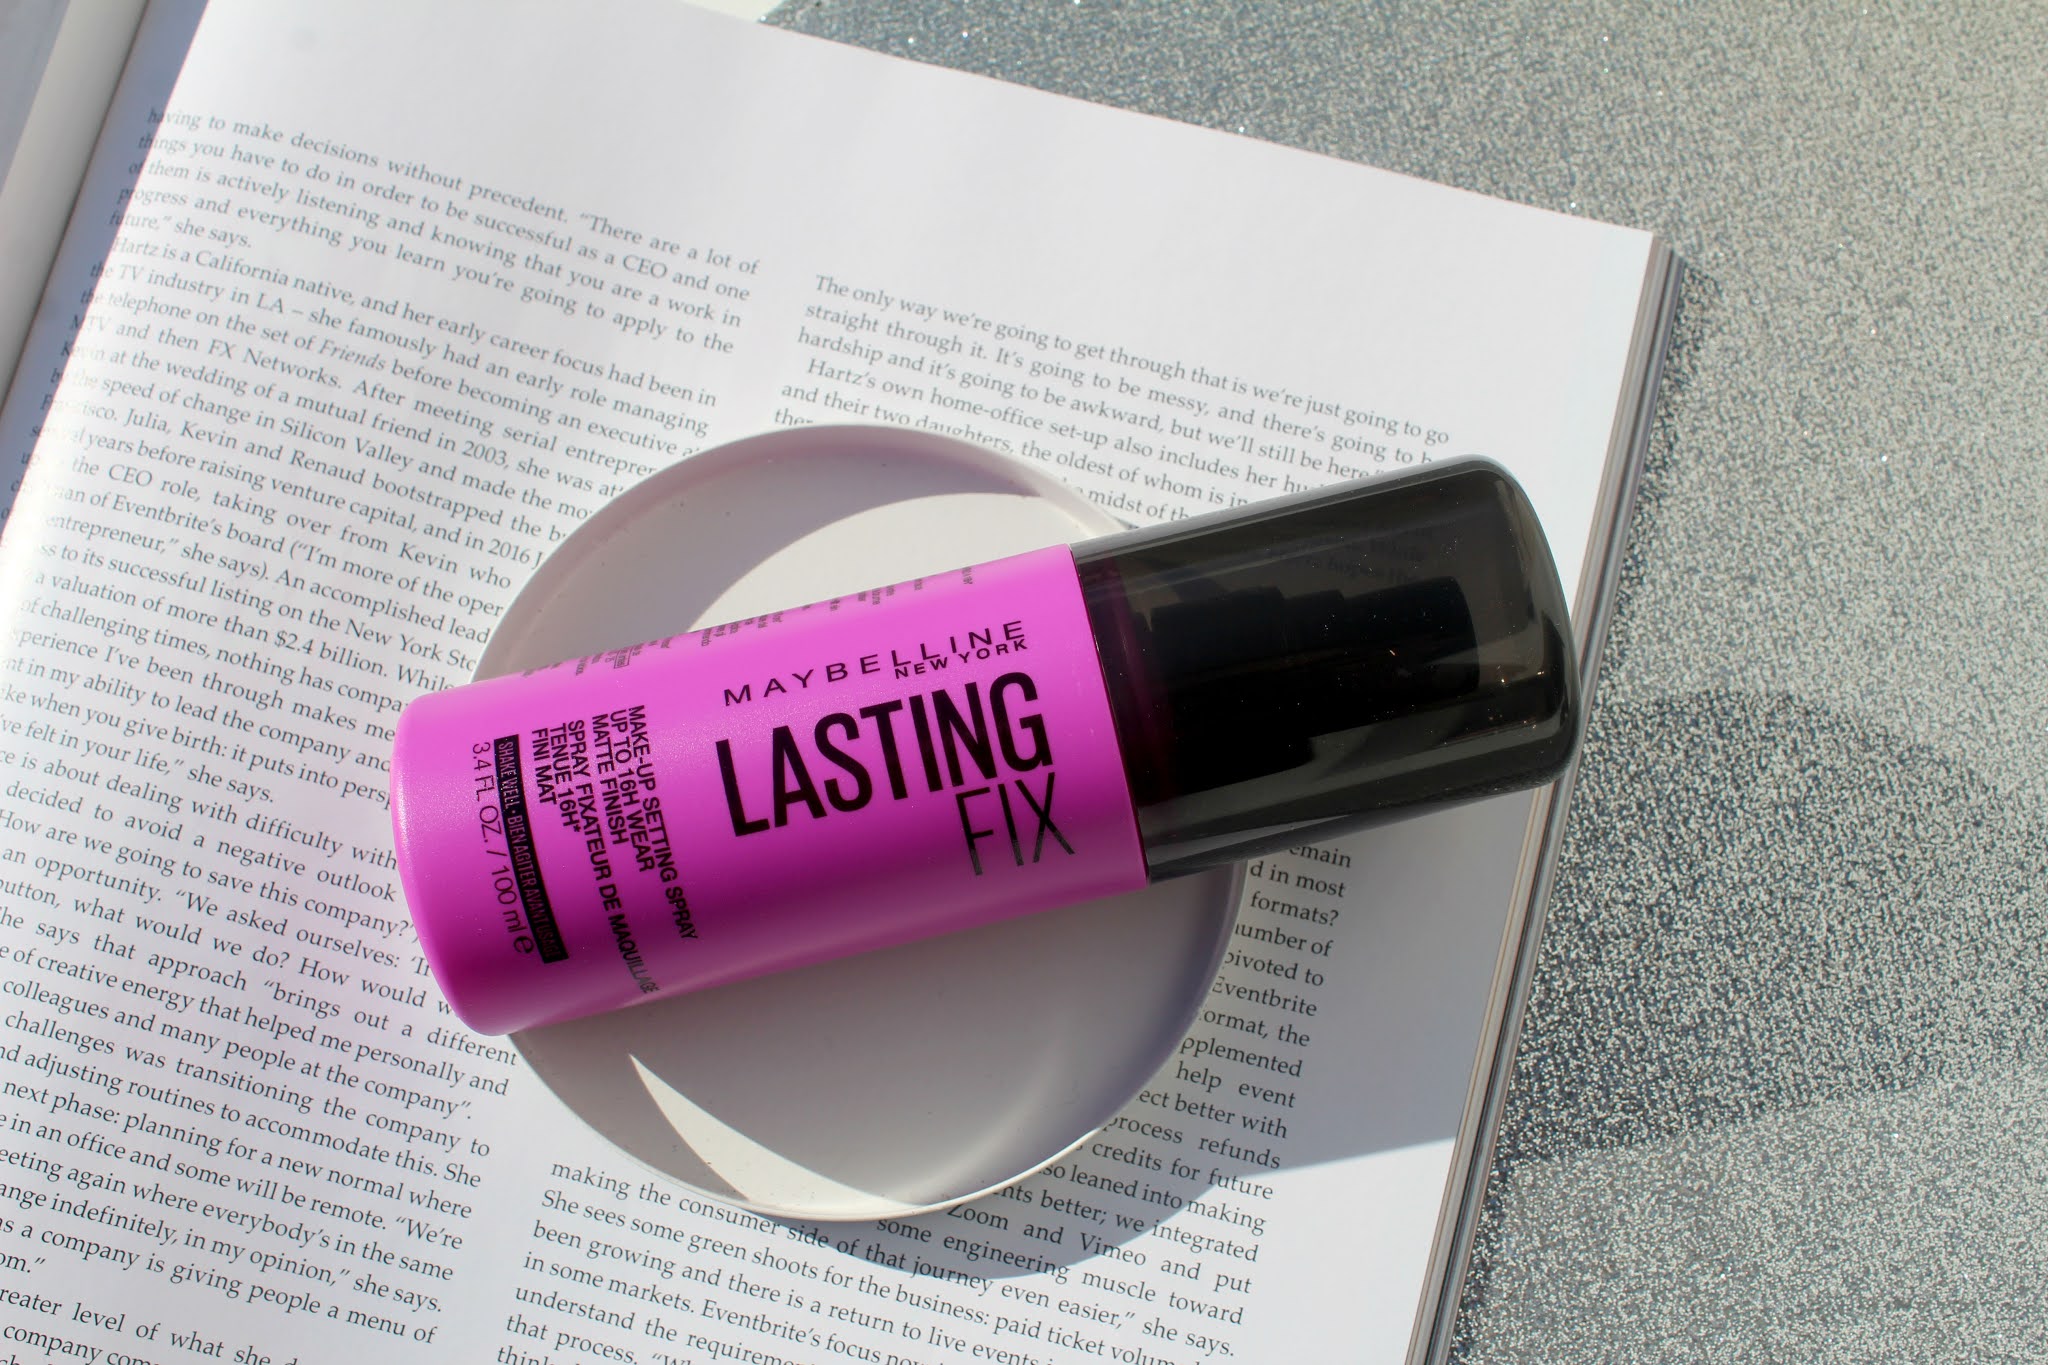 Review: Maybelline Lasting Fix Setting Spray